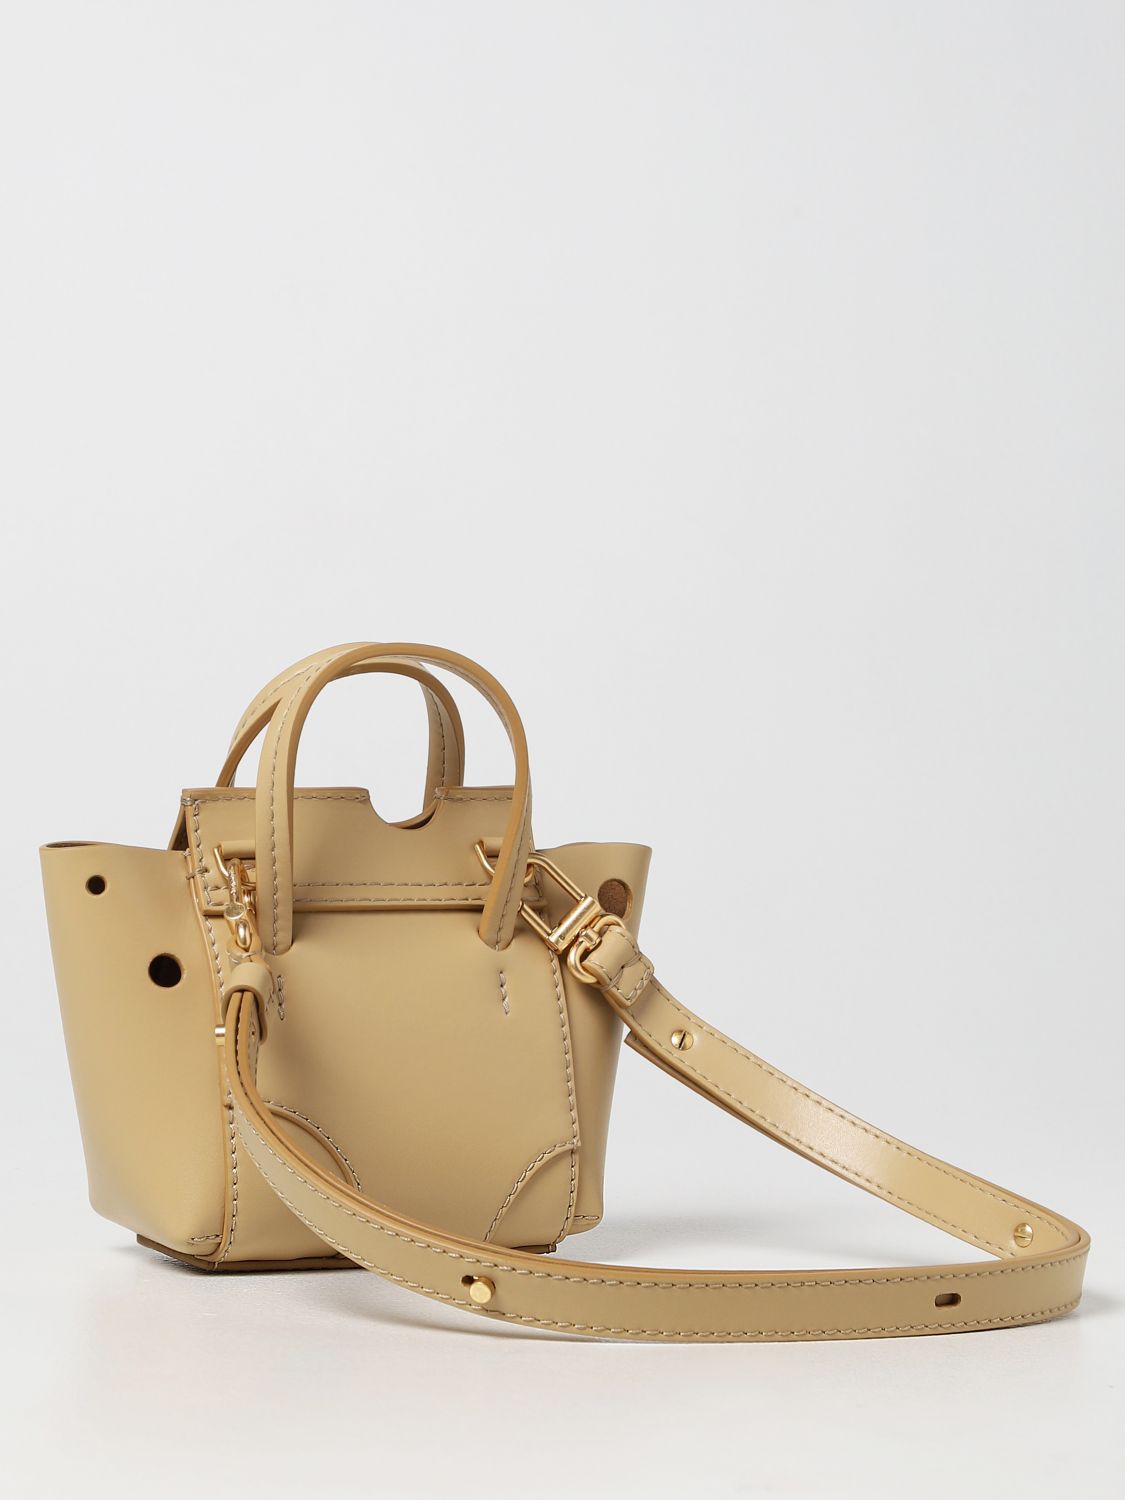 OFF-WHITE: Burrow Tote 16 bag in leather - Camel  Off-White handbag  OWNA178S22LEA001 online at